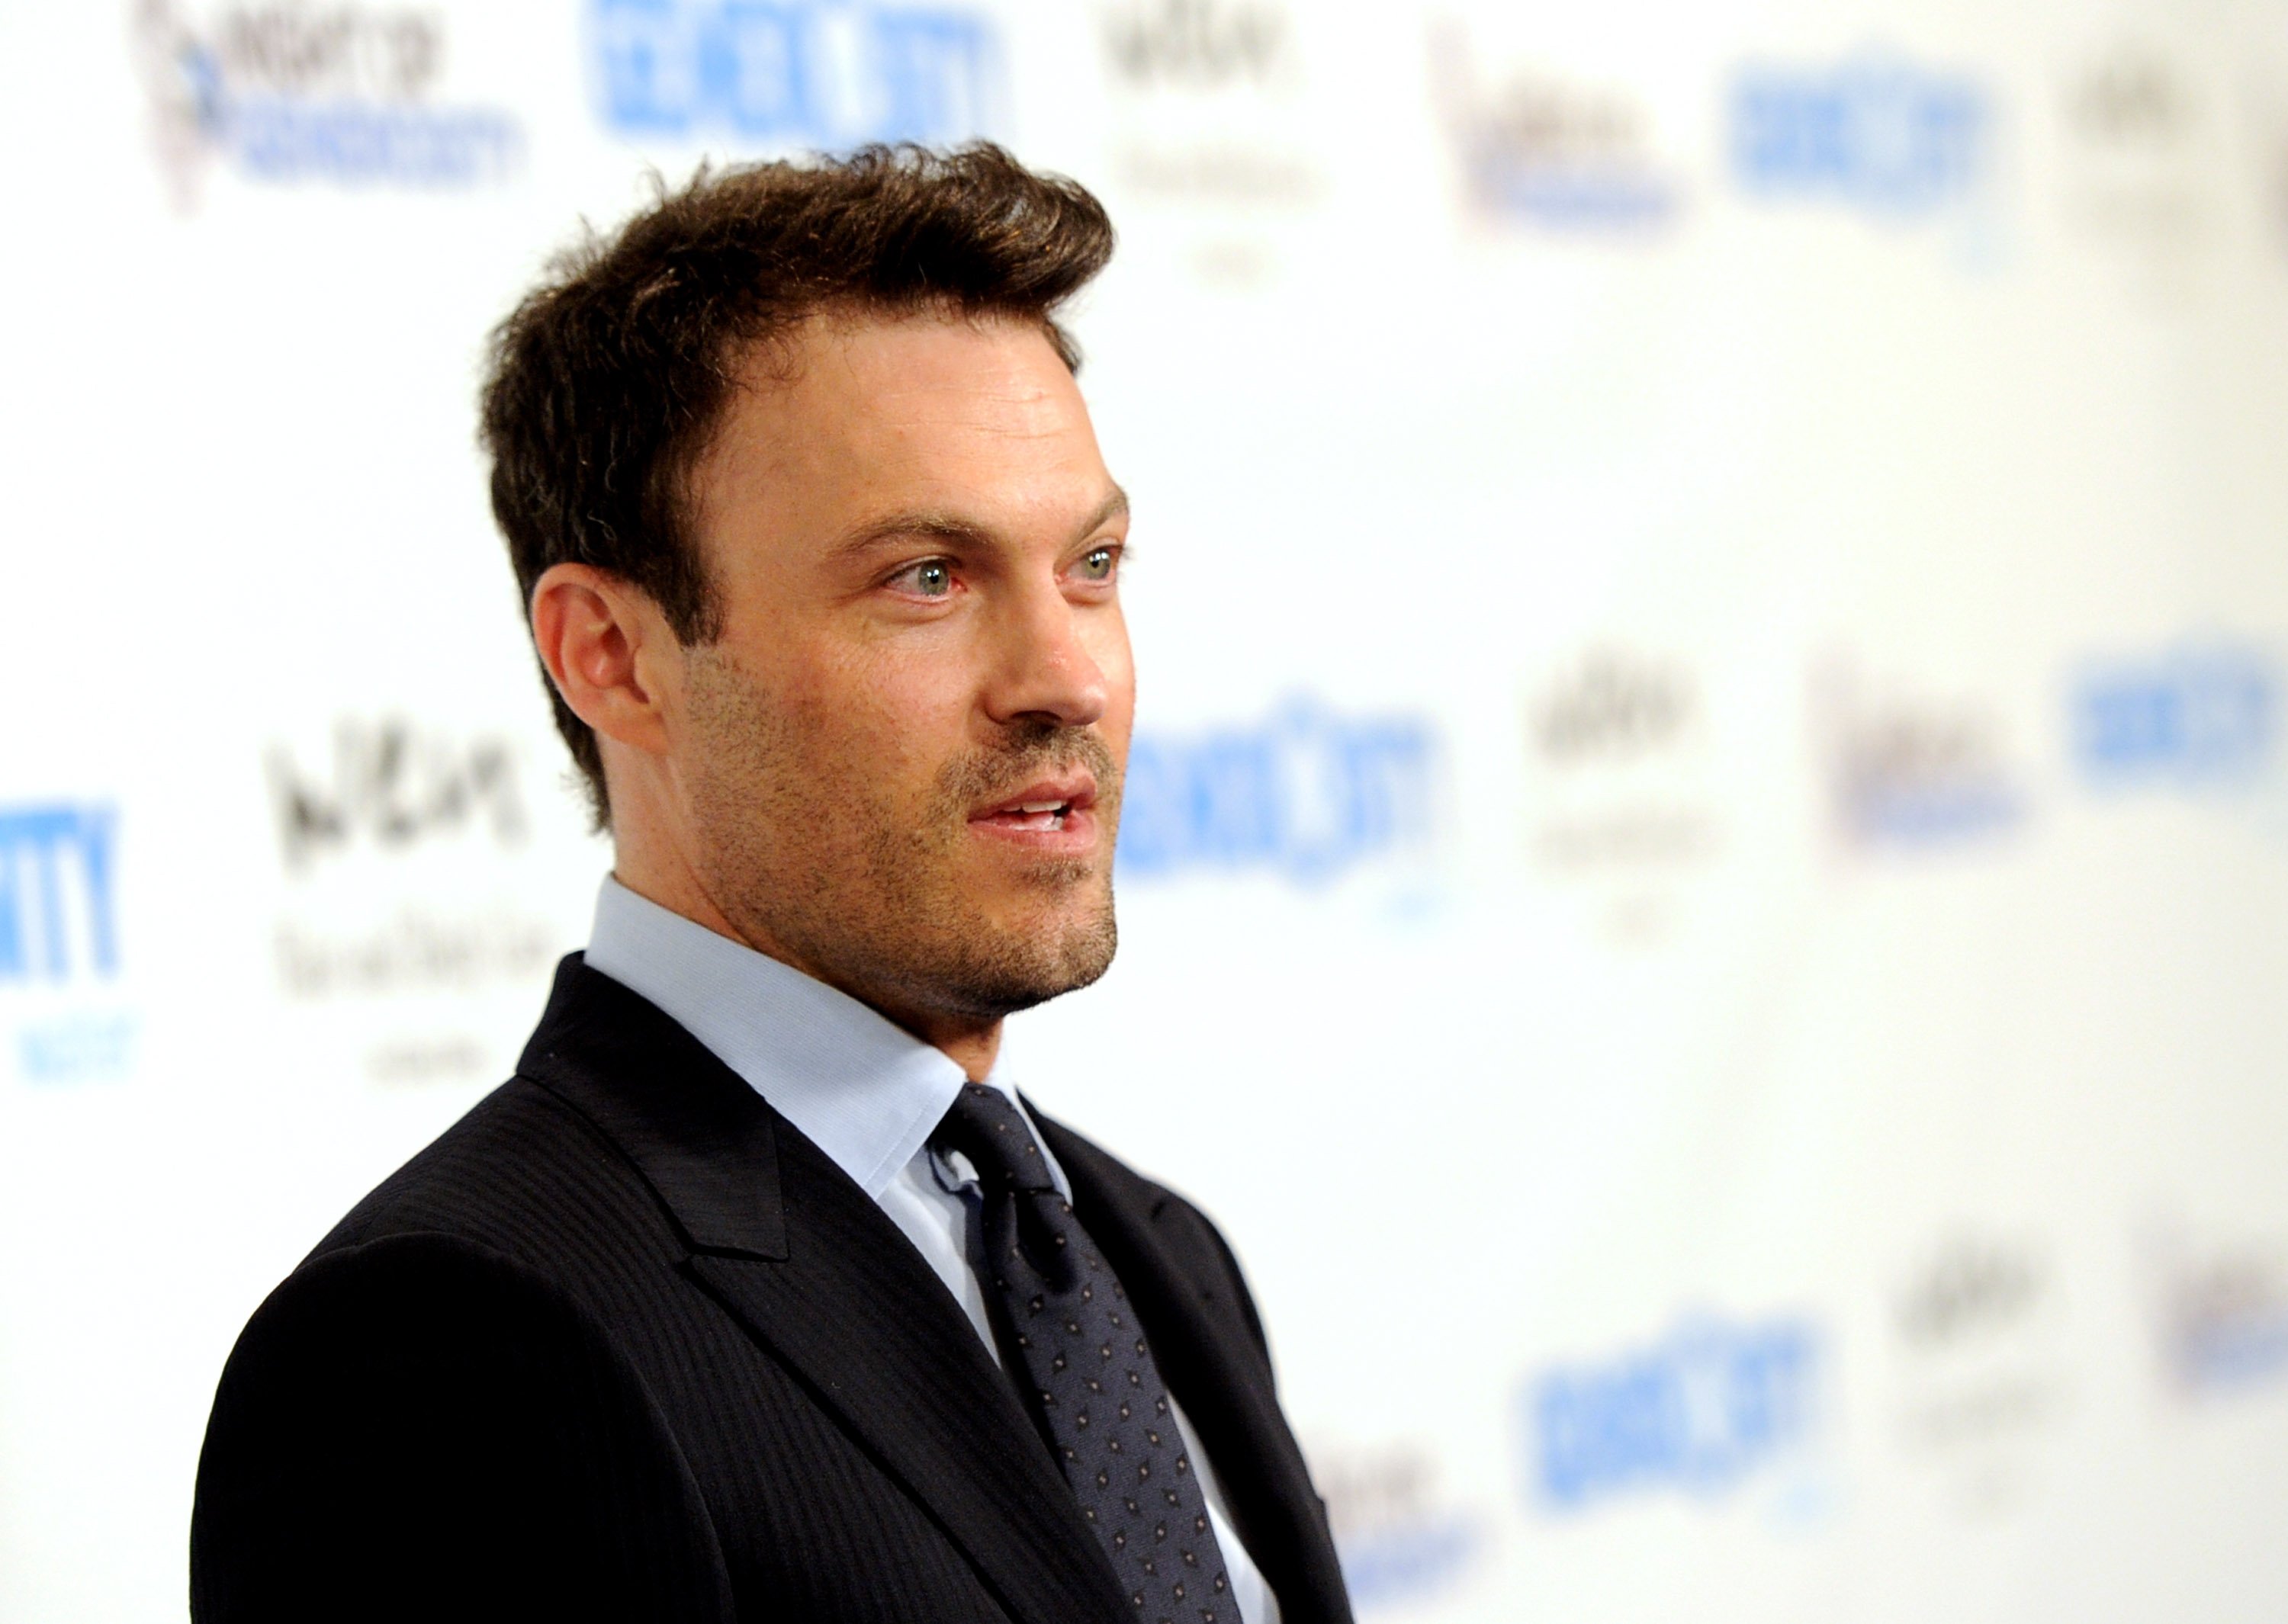 Brian Austin Green attends the 6th Annual Night Of Generosity Gala in Beverly Hills in December 2018 | Photo: Getty Images